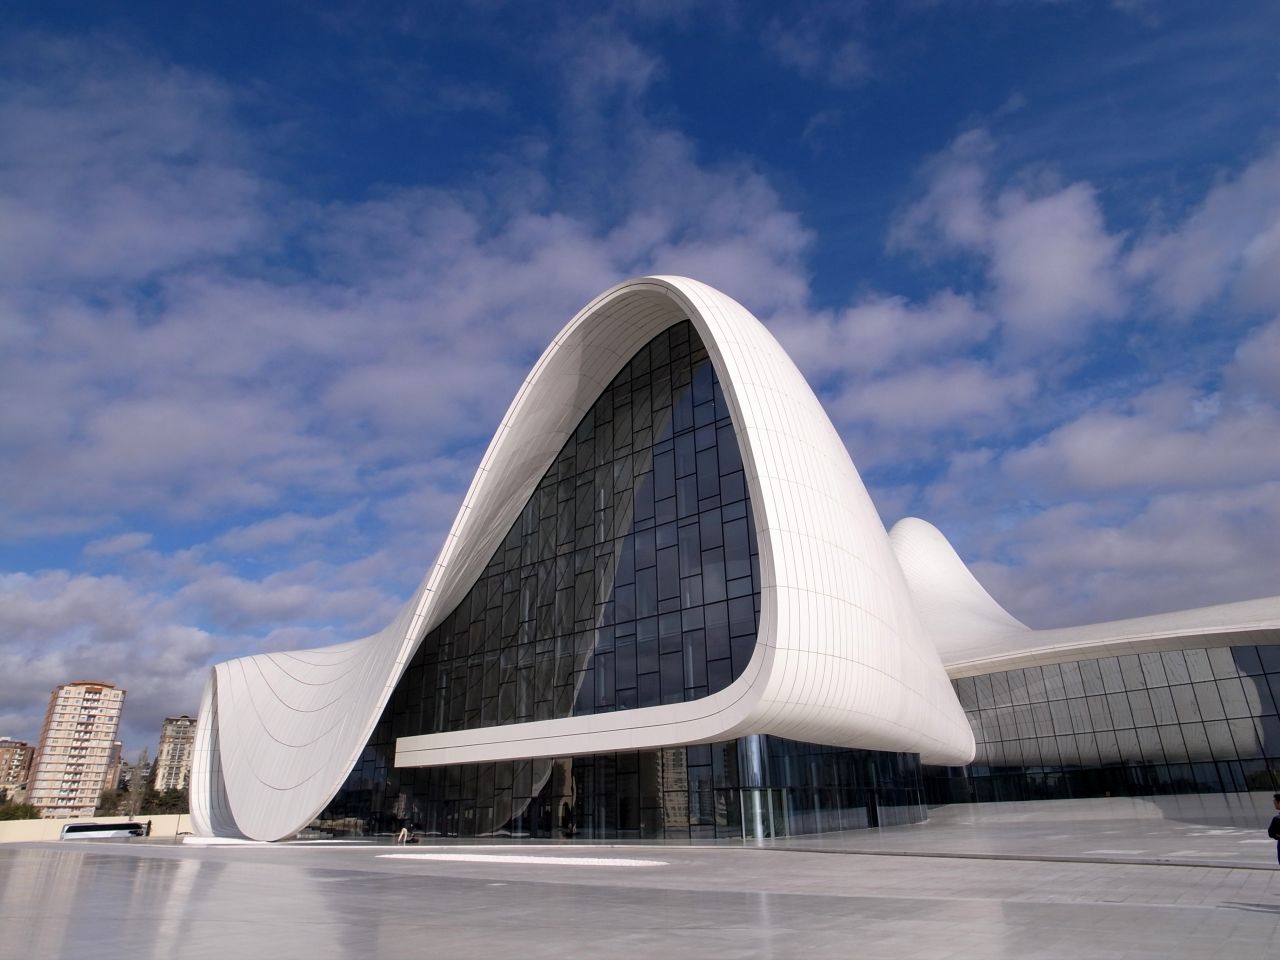 Money isn't just being invested in sport. The Heydar Aliyev Center's fluid forms are a contrast to the rigid and monumental architecture one normally finds in Baku. President Ilham Aliyev, who officially opened the building on May 10, 2012, named the building after his late father, Heydar Aliyev, who was also a president of Azerbaijan. Architect: Zaha Hadid Architects